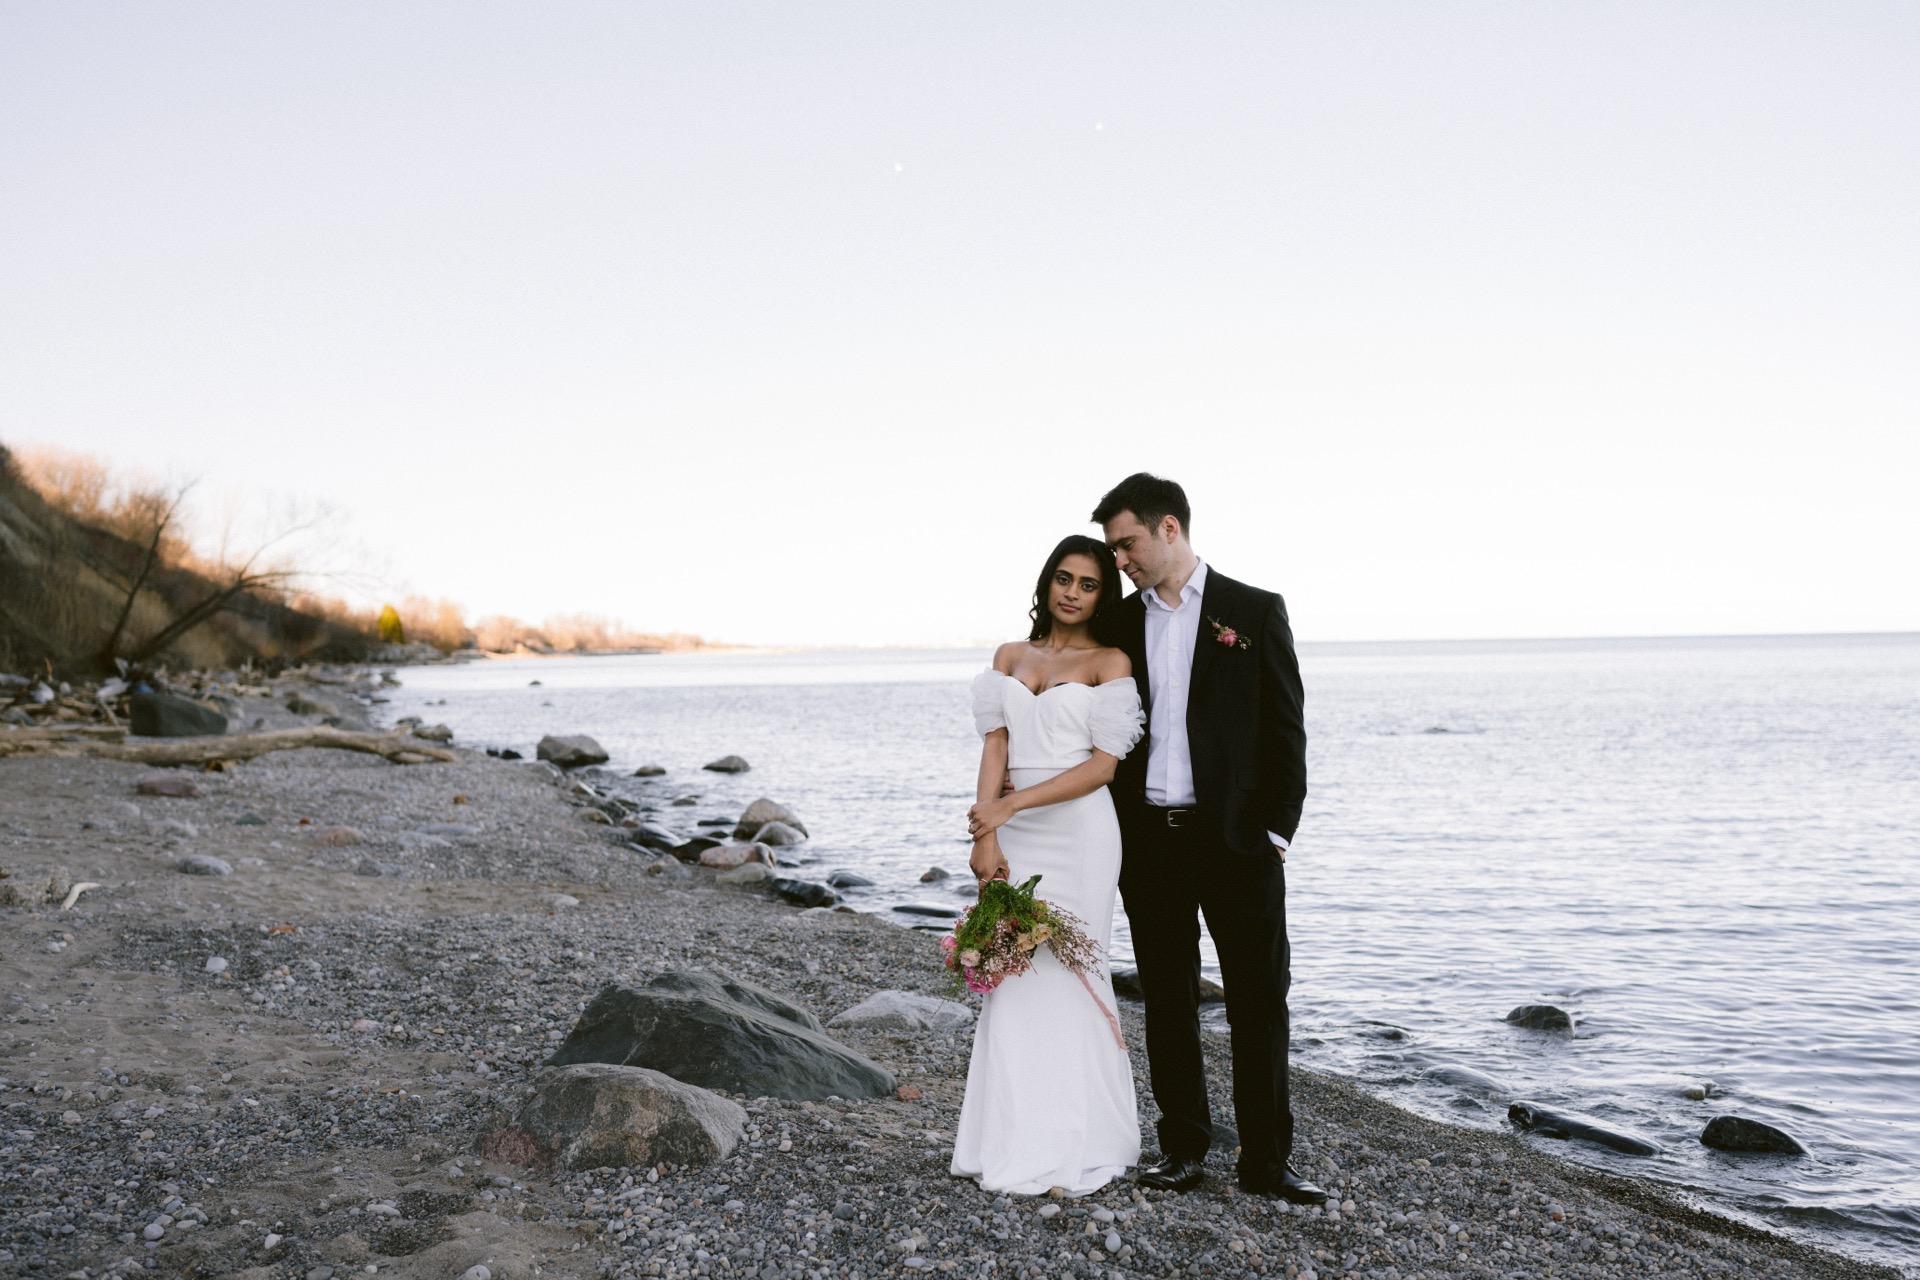 The newlywed poses for their couple portrait by Lake Ontario near Sunrise Hill.